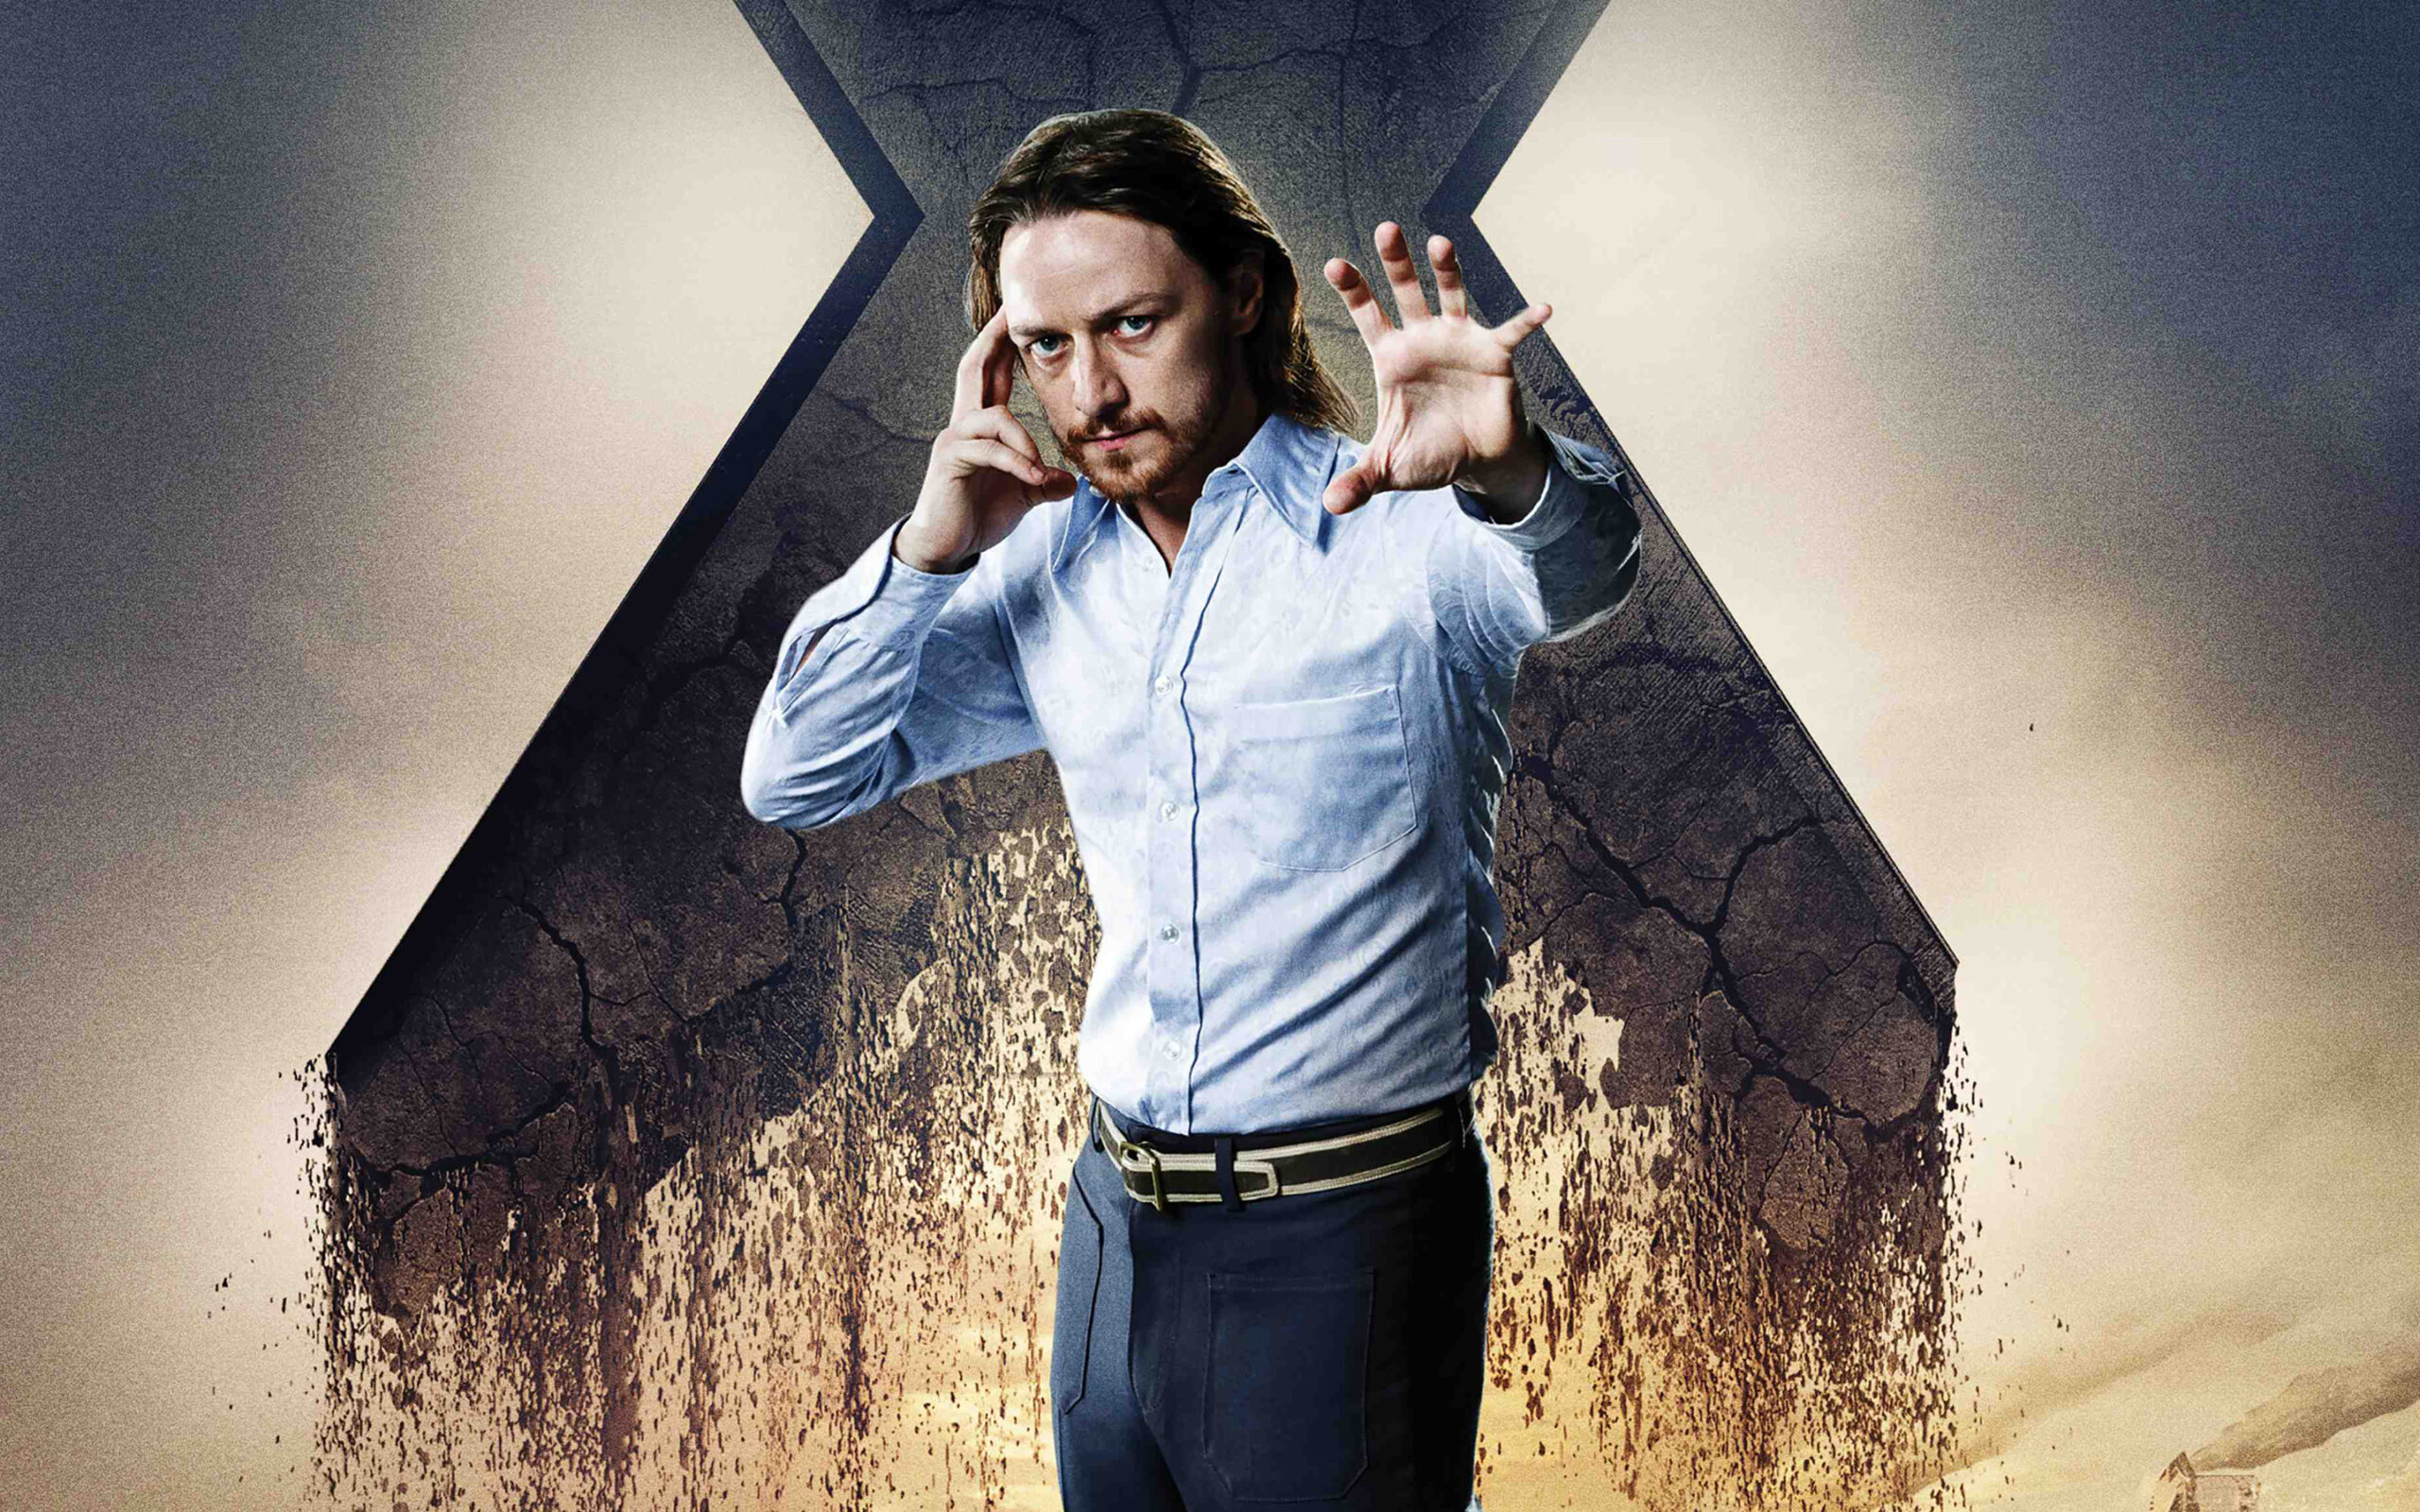 james_mcavoy_as_charles_xavier-wide-8743841, 7570672, 1669165513, 20221123010513, 23, 11, 2022